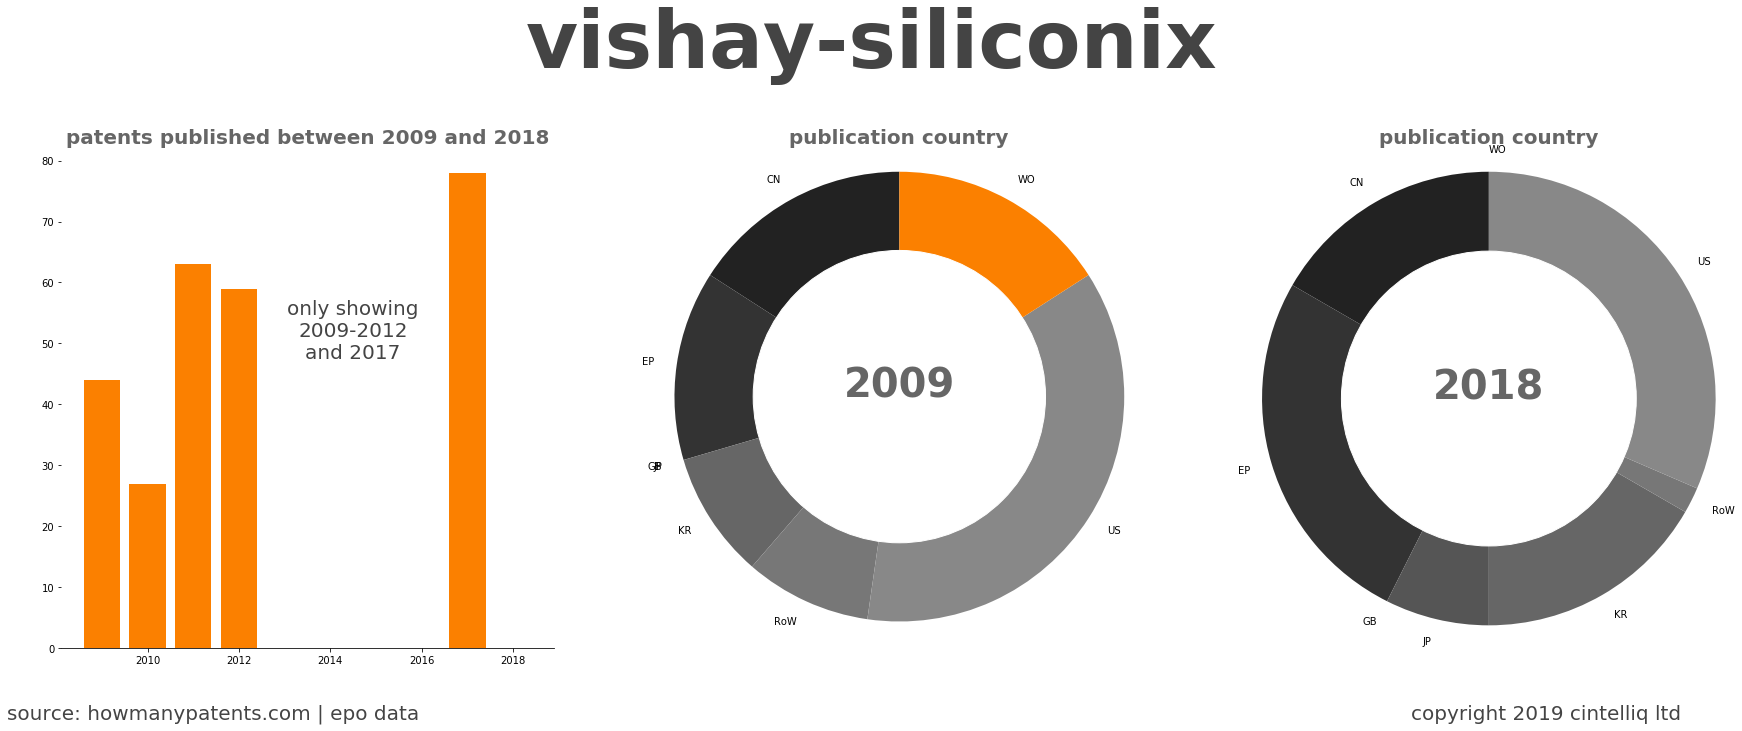 summary of patents for Vishay-Siliconix